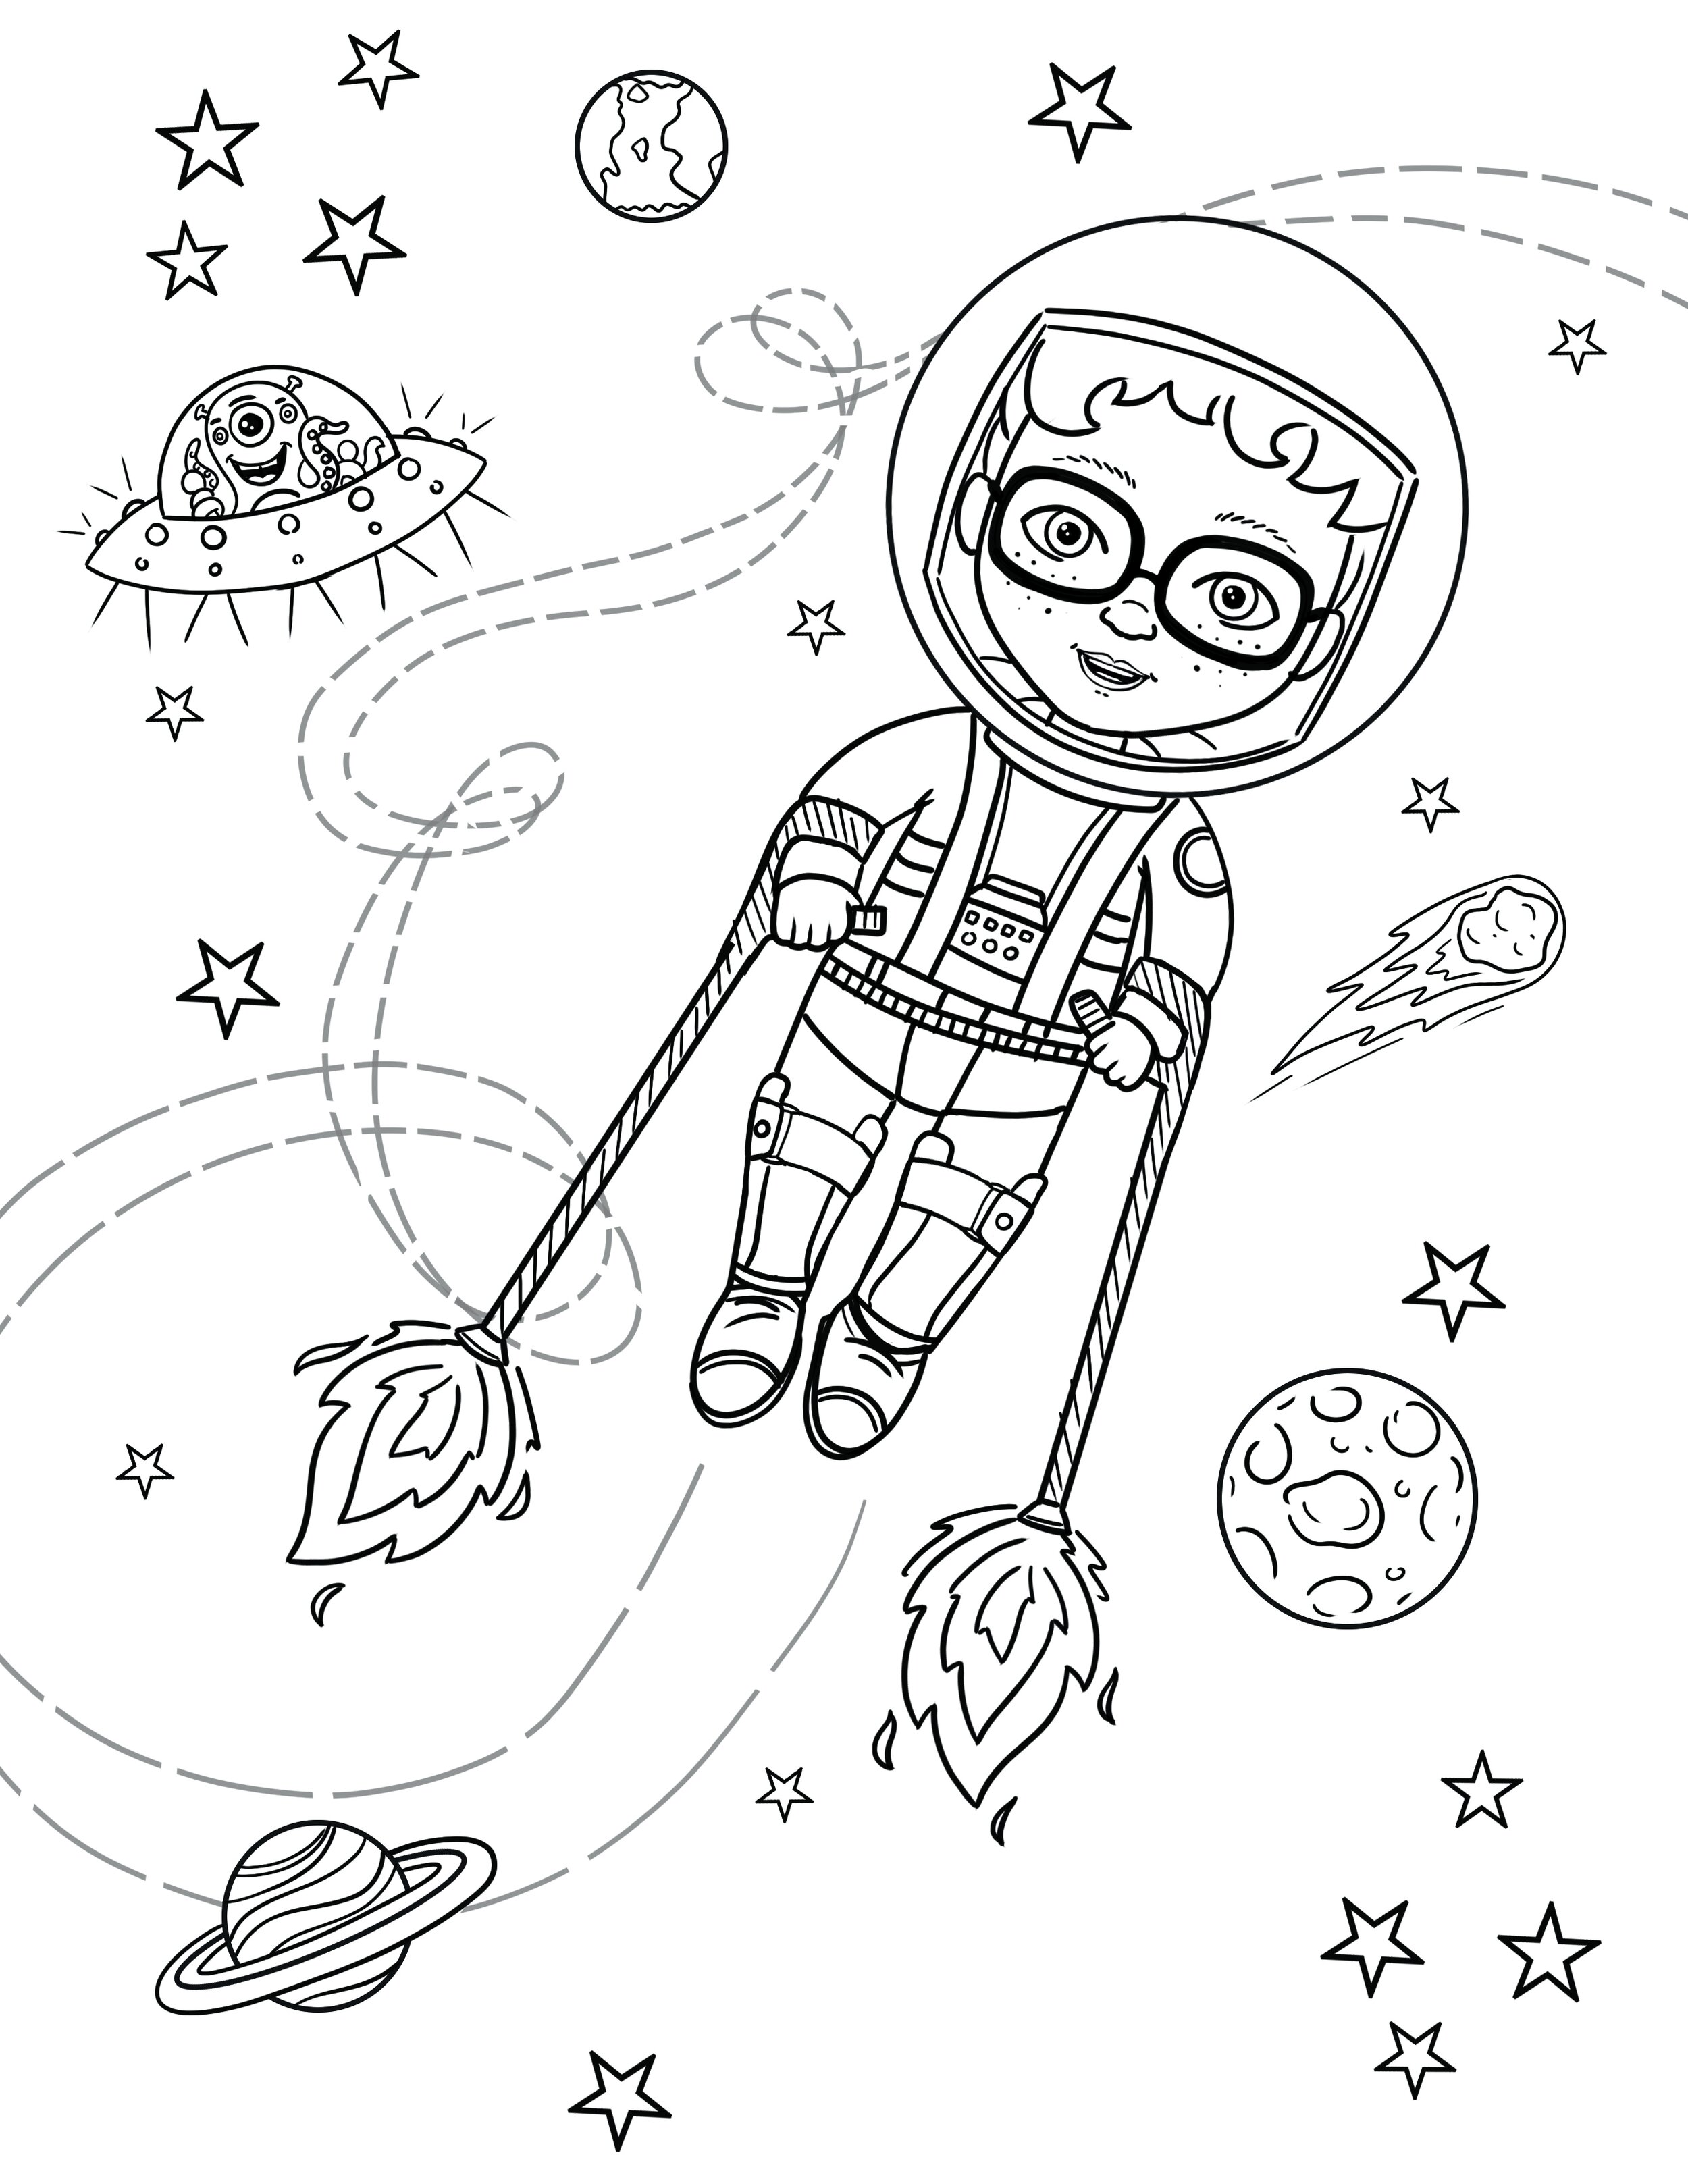 Make a colouring book in 10 minutes to entertain your kids for hours